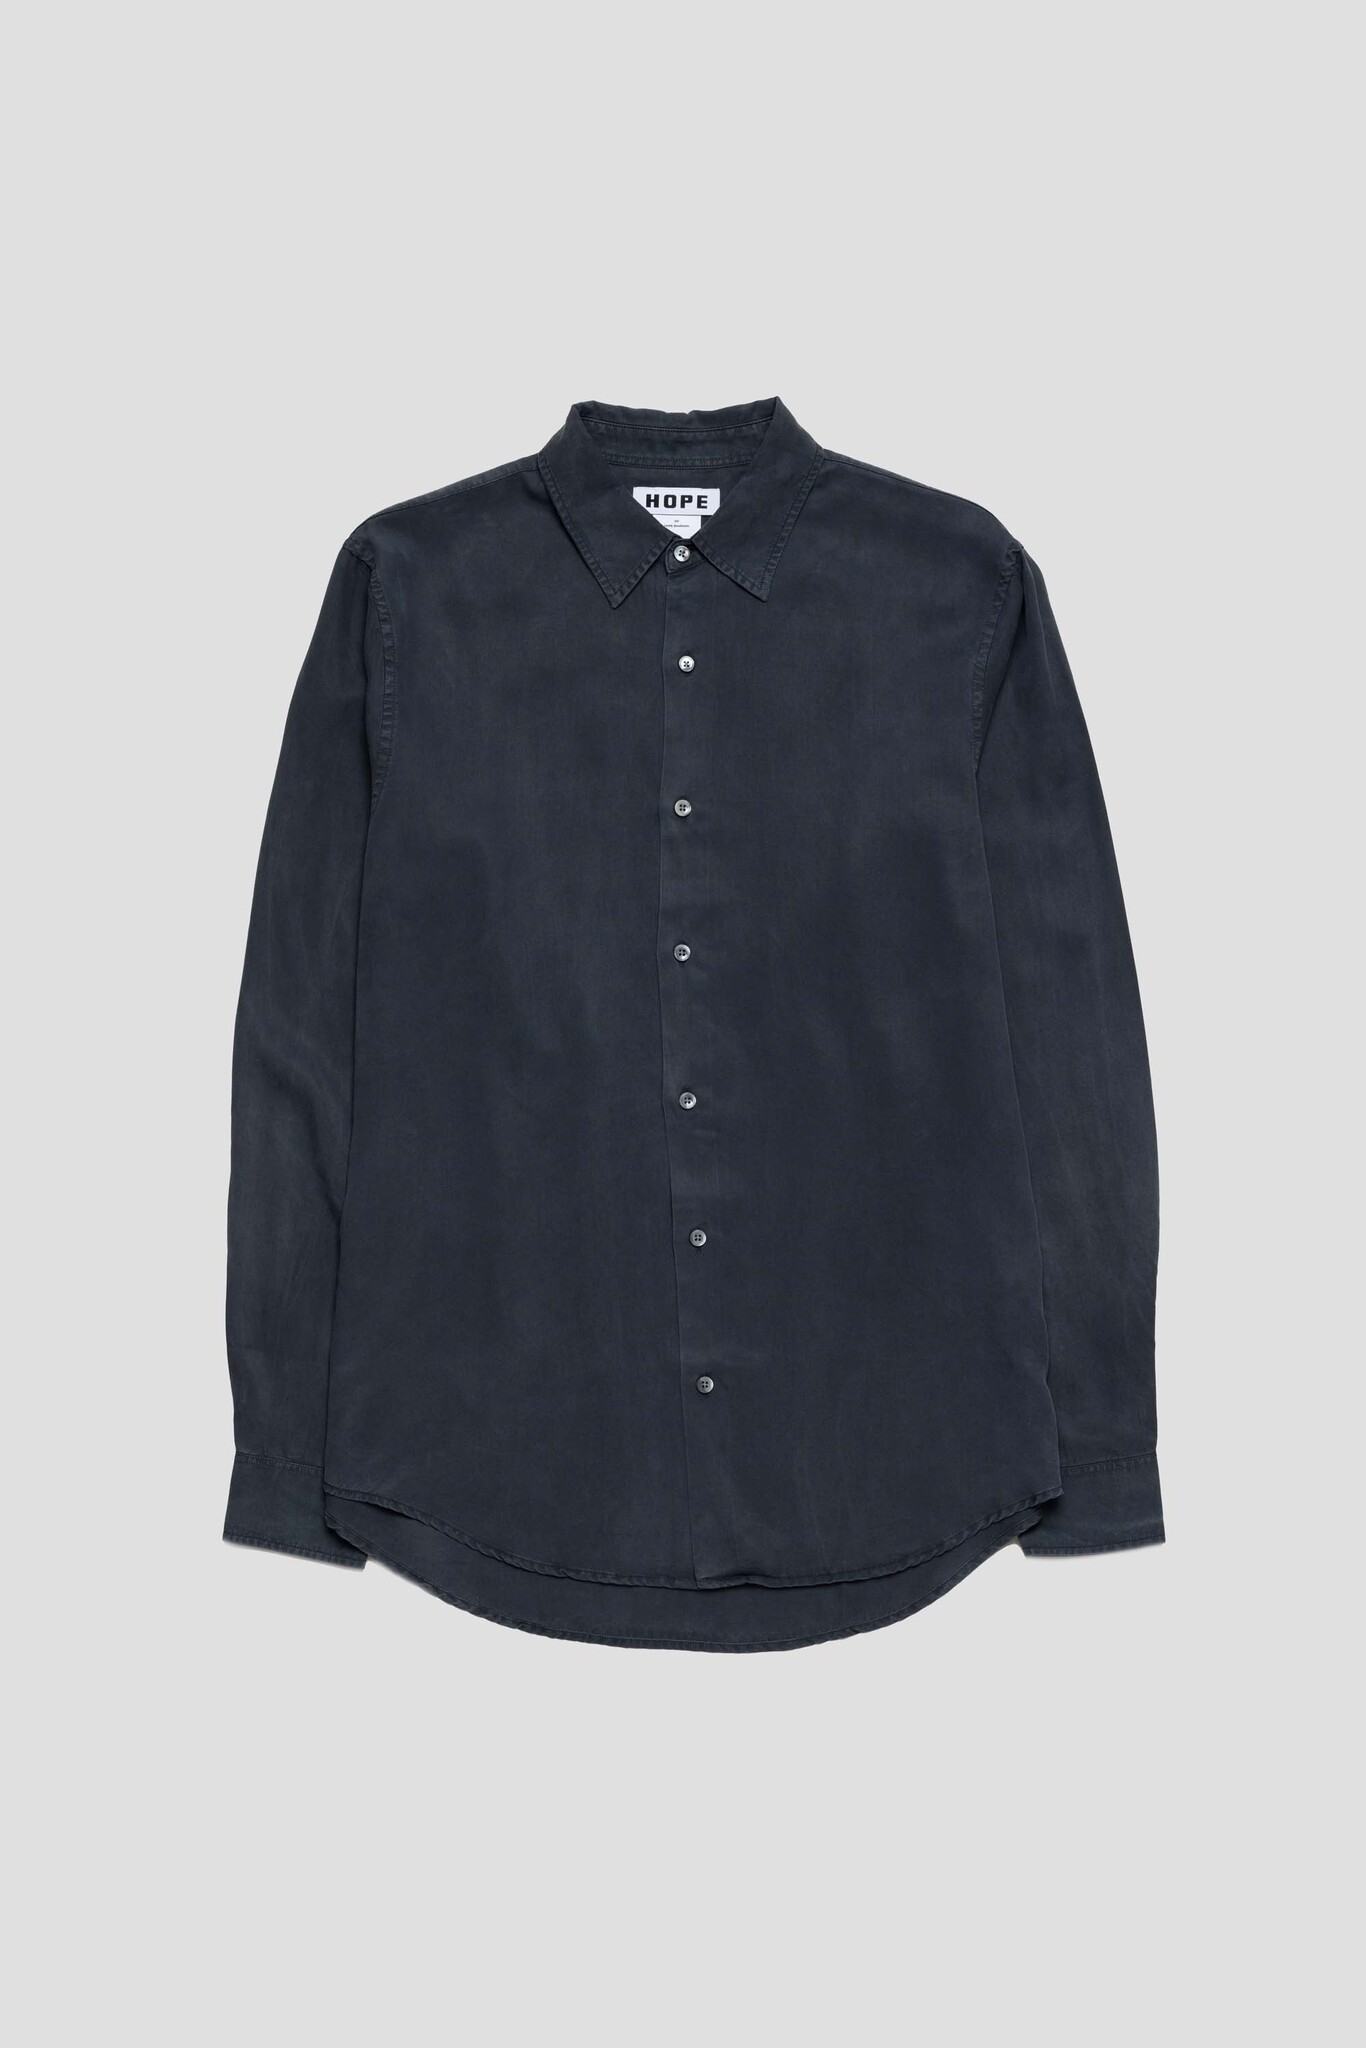 Air Clean Shirt Faded Black Tencel | Welcome to Shelter